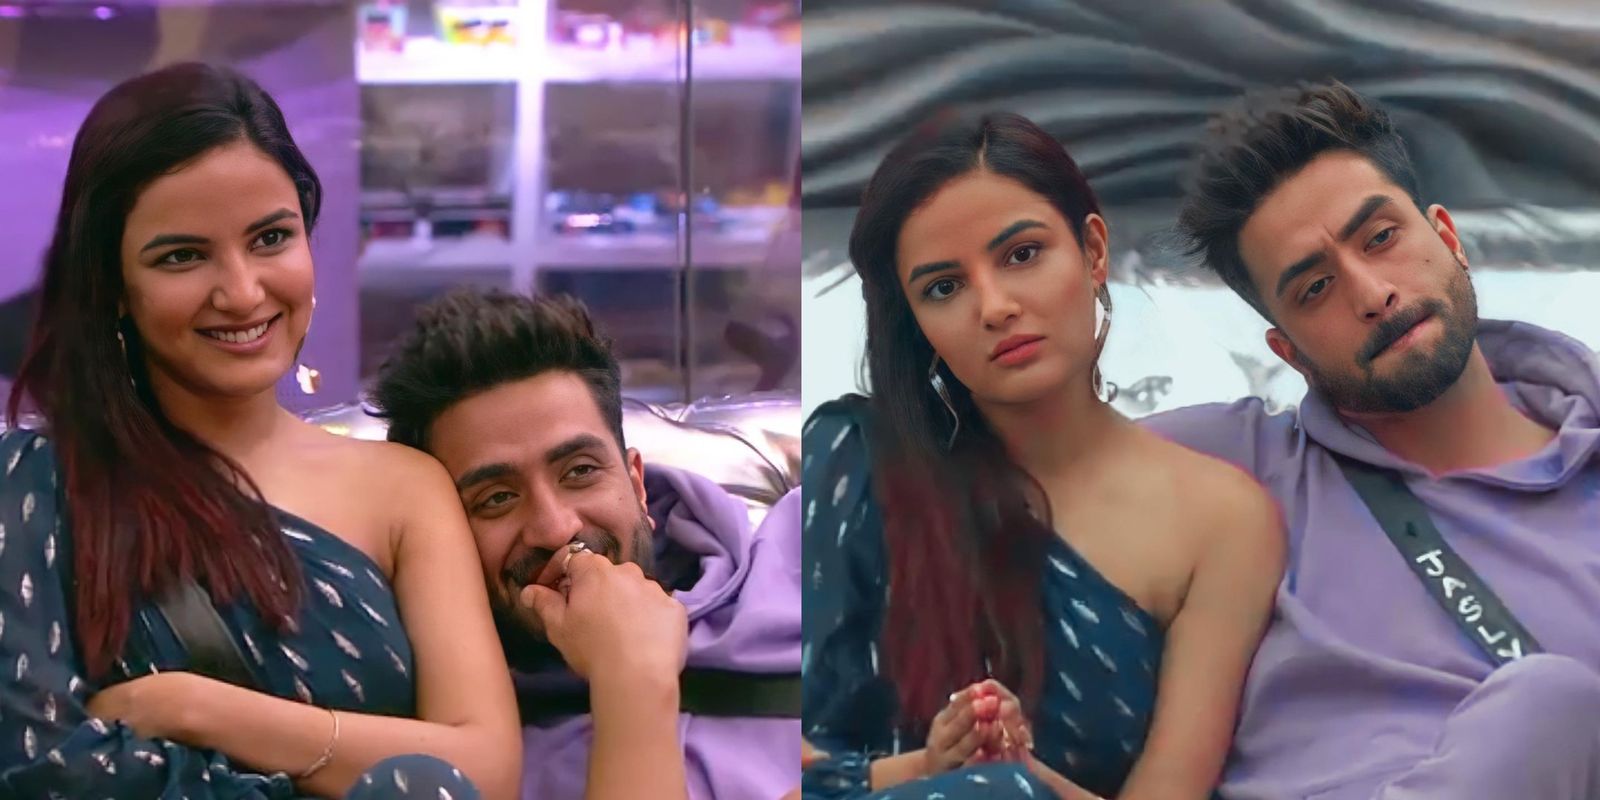 Bigg Boss 14: Netizens Request Aly Goni To Find Another GF; Call Jasmin Bhasin ‘Jealous Jasmean’